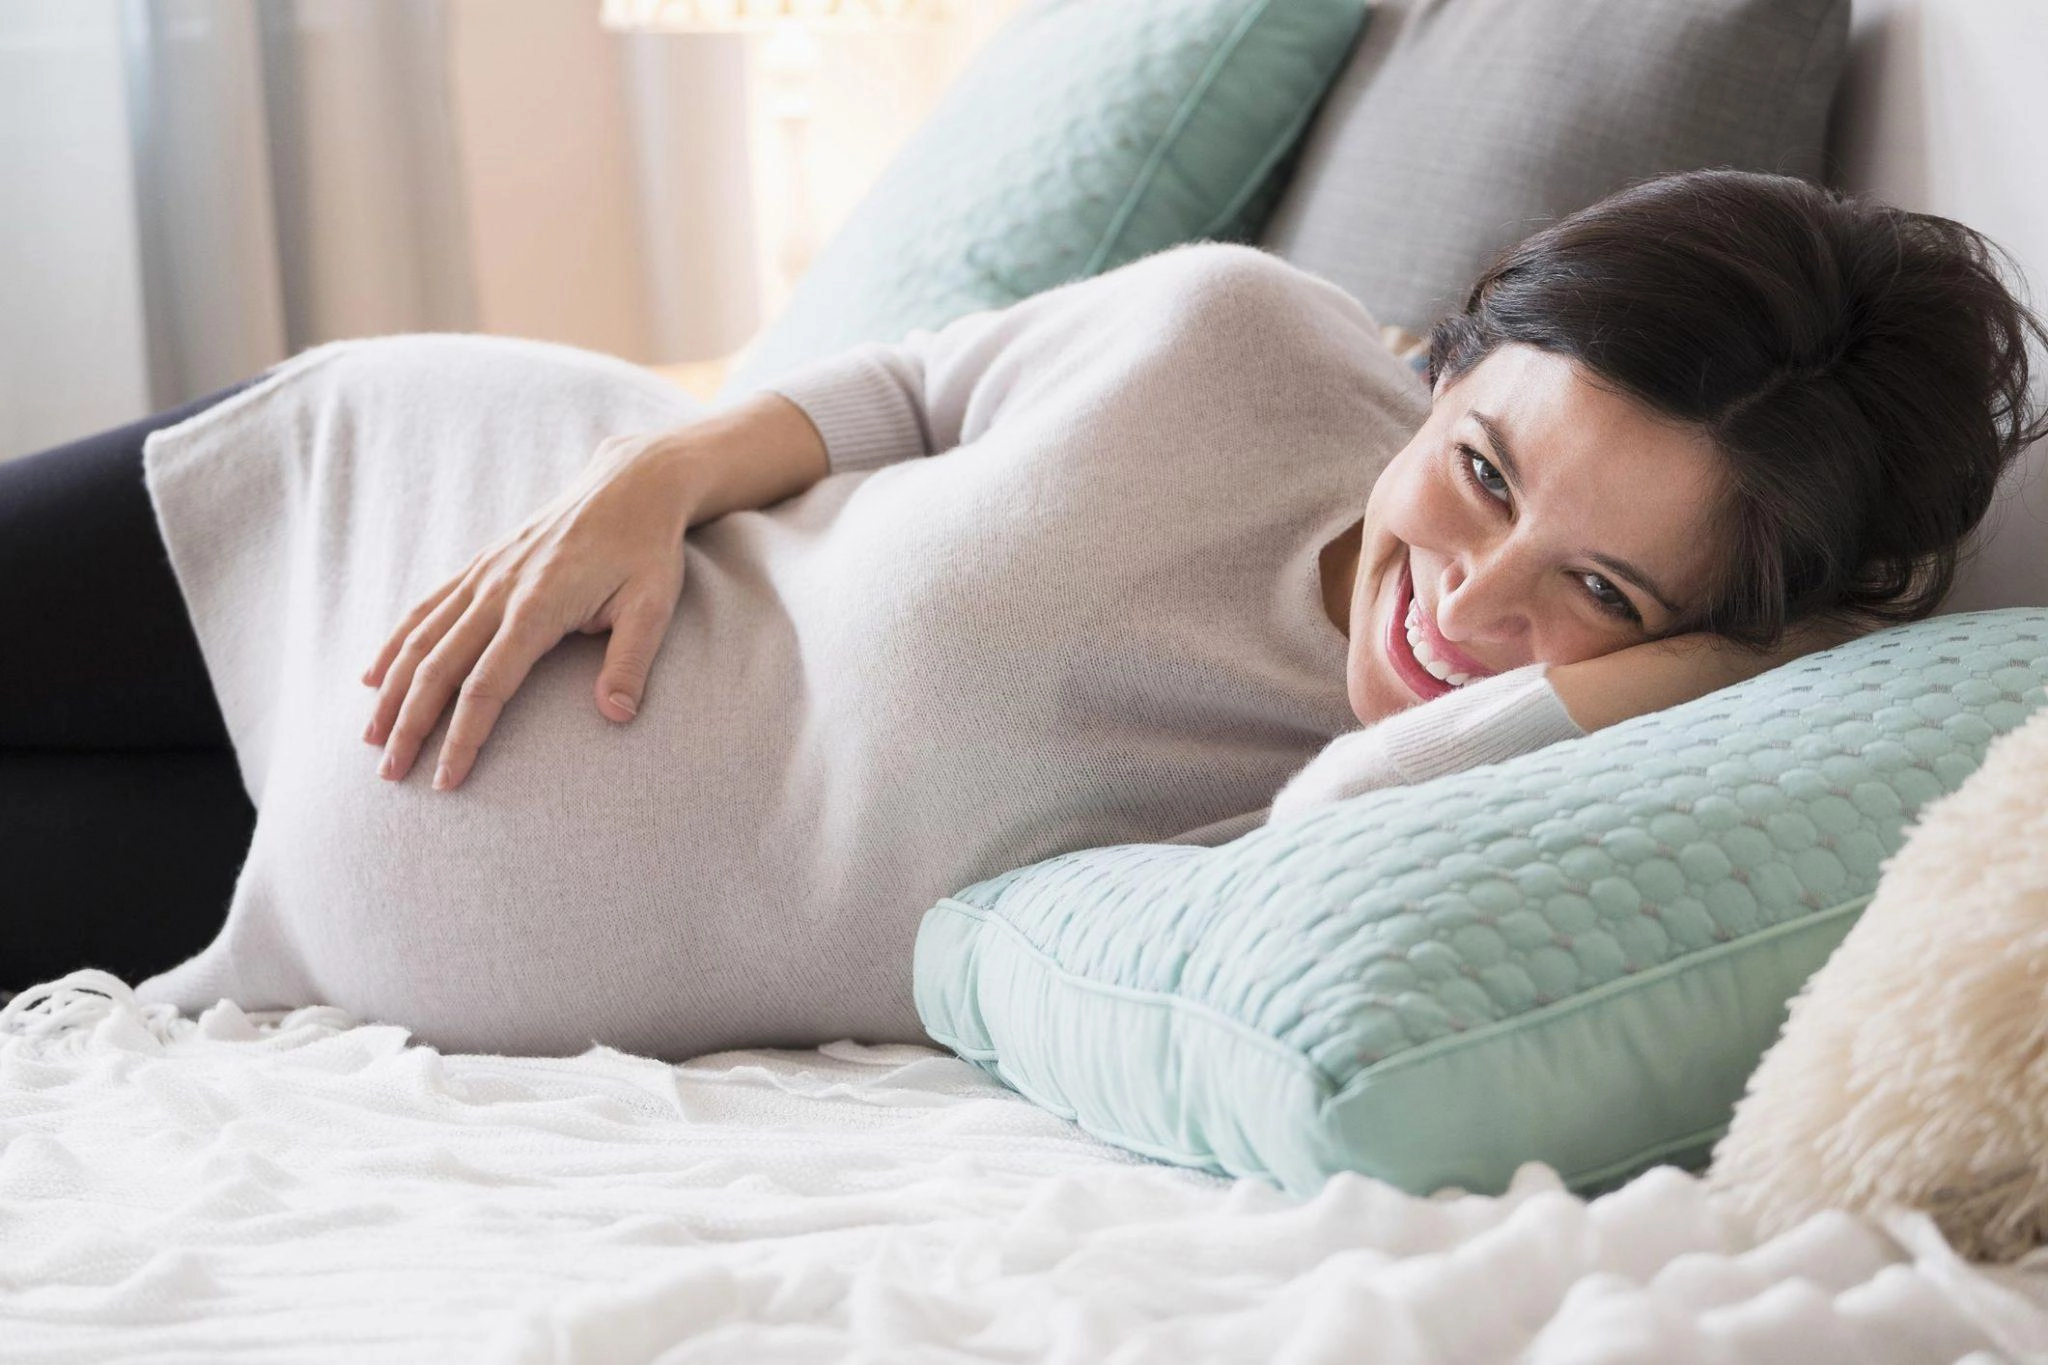 What Are the Requirements for Becoming a Surrogate Mother Kentucky?